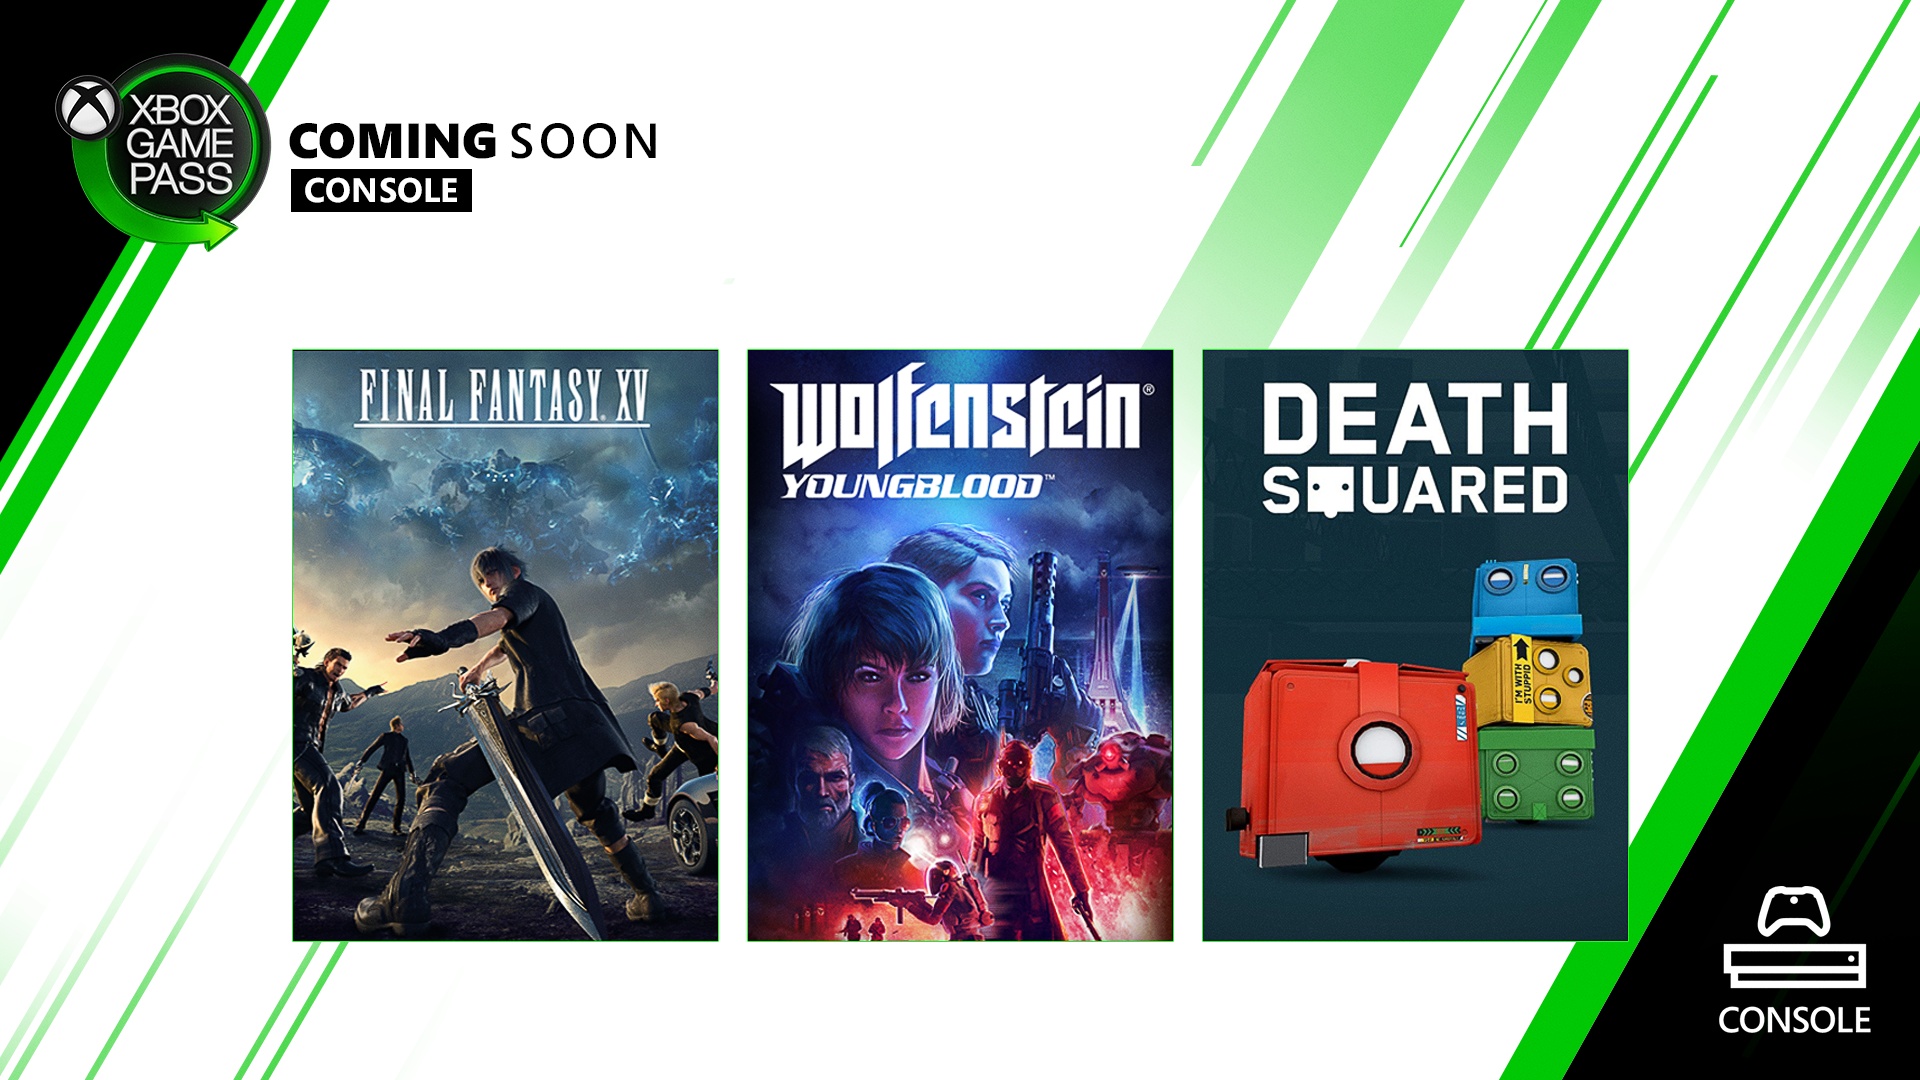 Xbox Game Pass for Console - February 2020